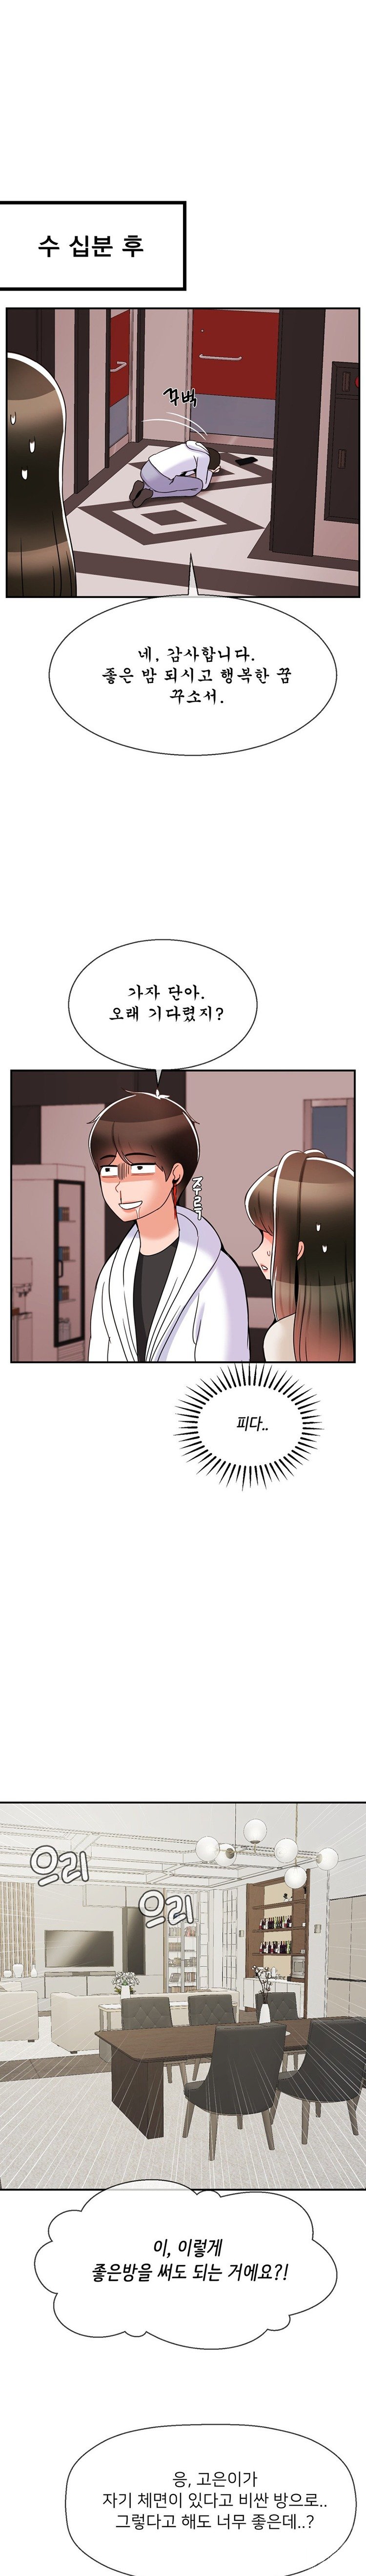 seventeenth-only-son-raw-chap-31-15